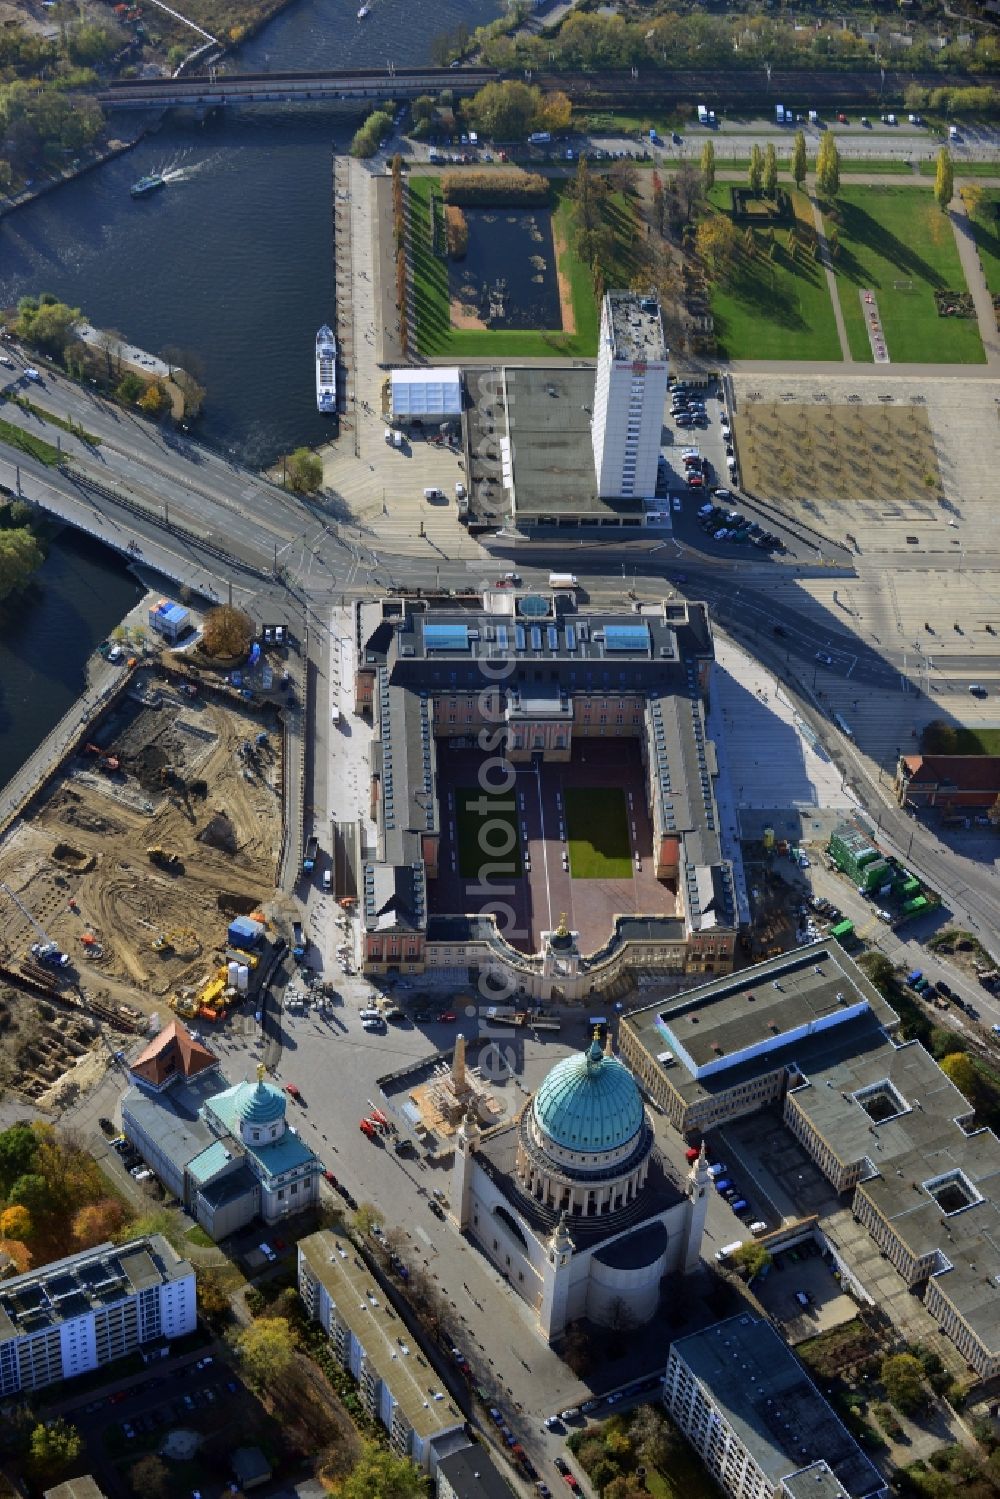 Aerial photograph Potsdam - View of new construction of the parliament in Potsdam in Brandenburg